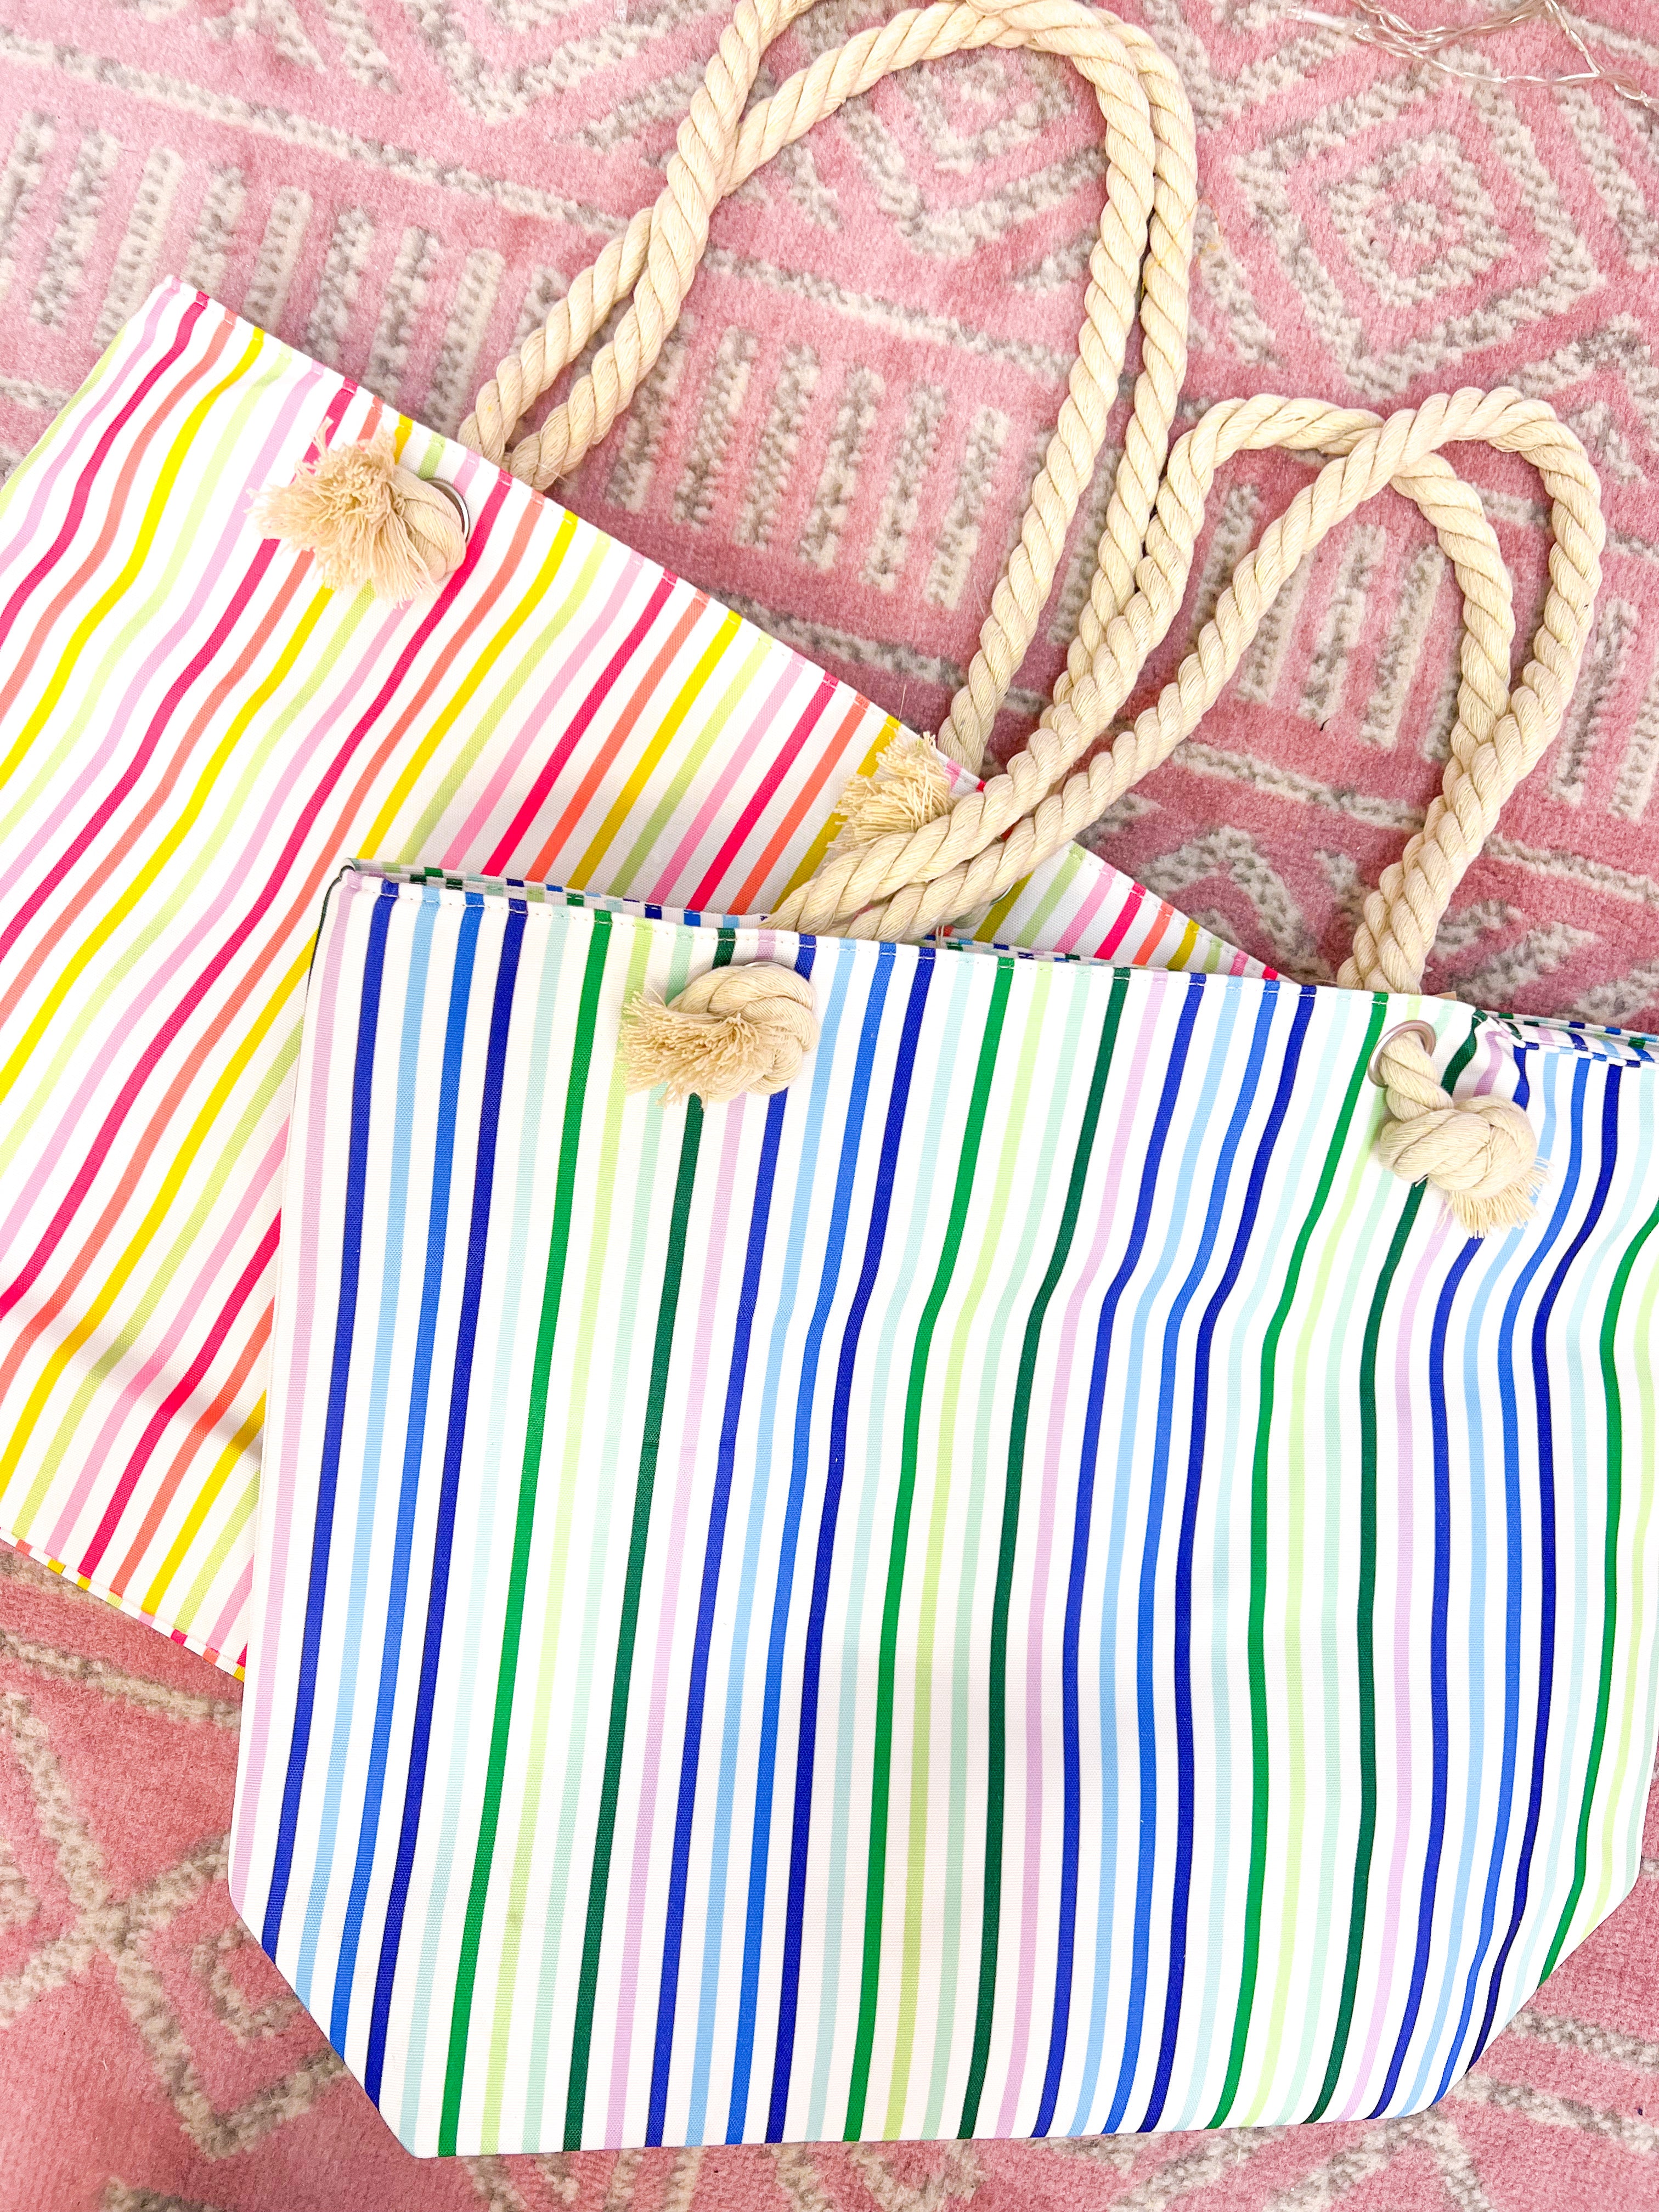 Summer Stripes Tote-290 Bag/Handbags-The Lovely Closet-The Lovely Closet, Women's Fashion Boutique in Alexandria, KY